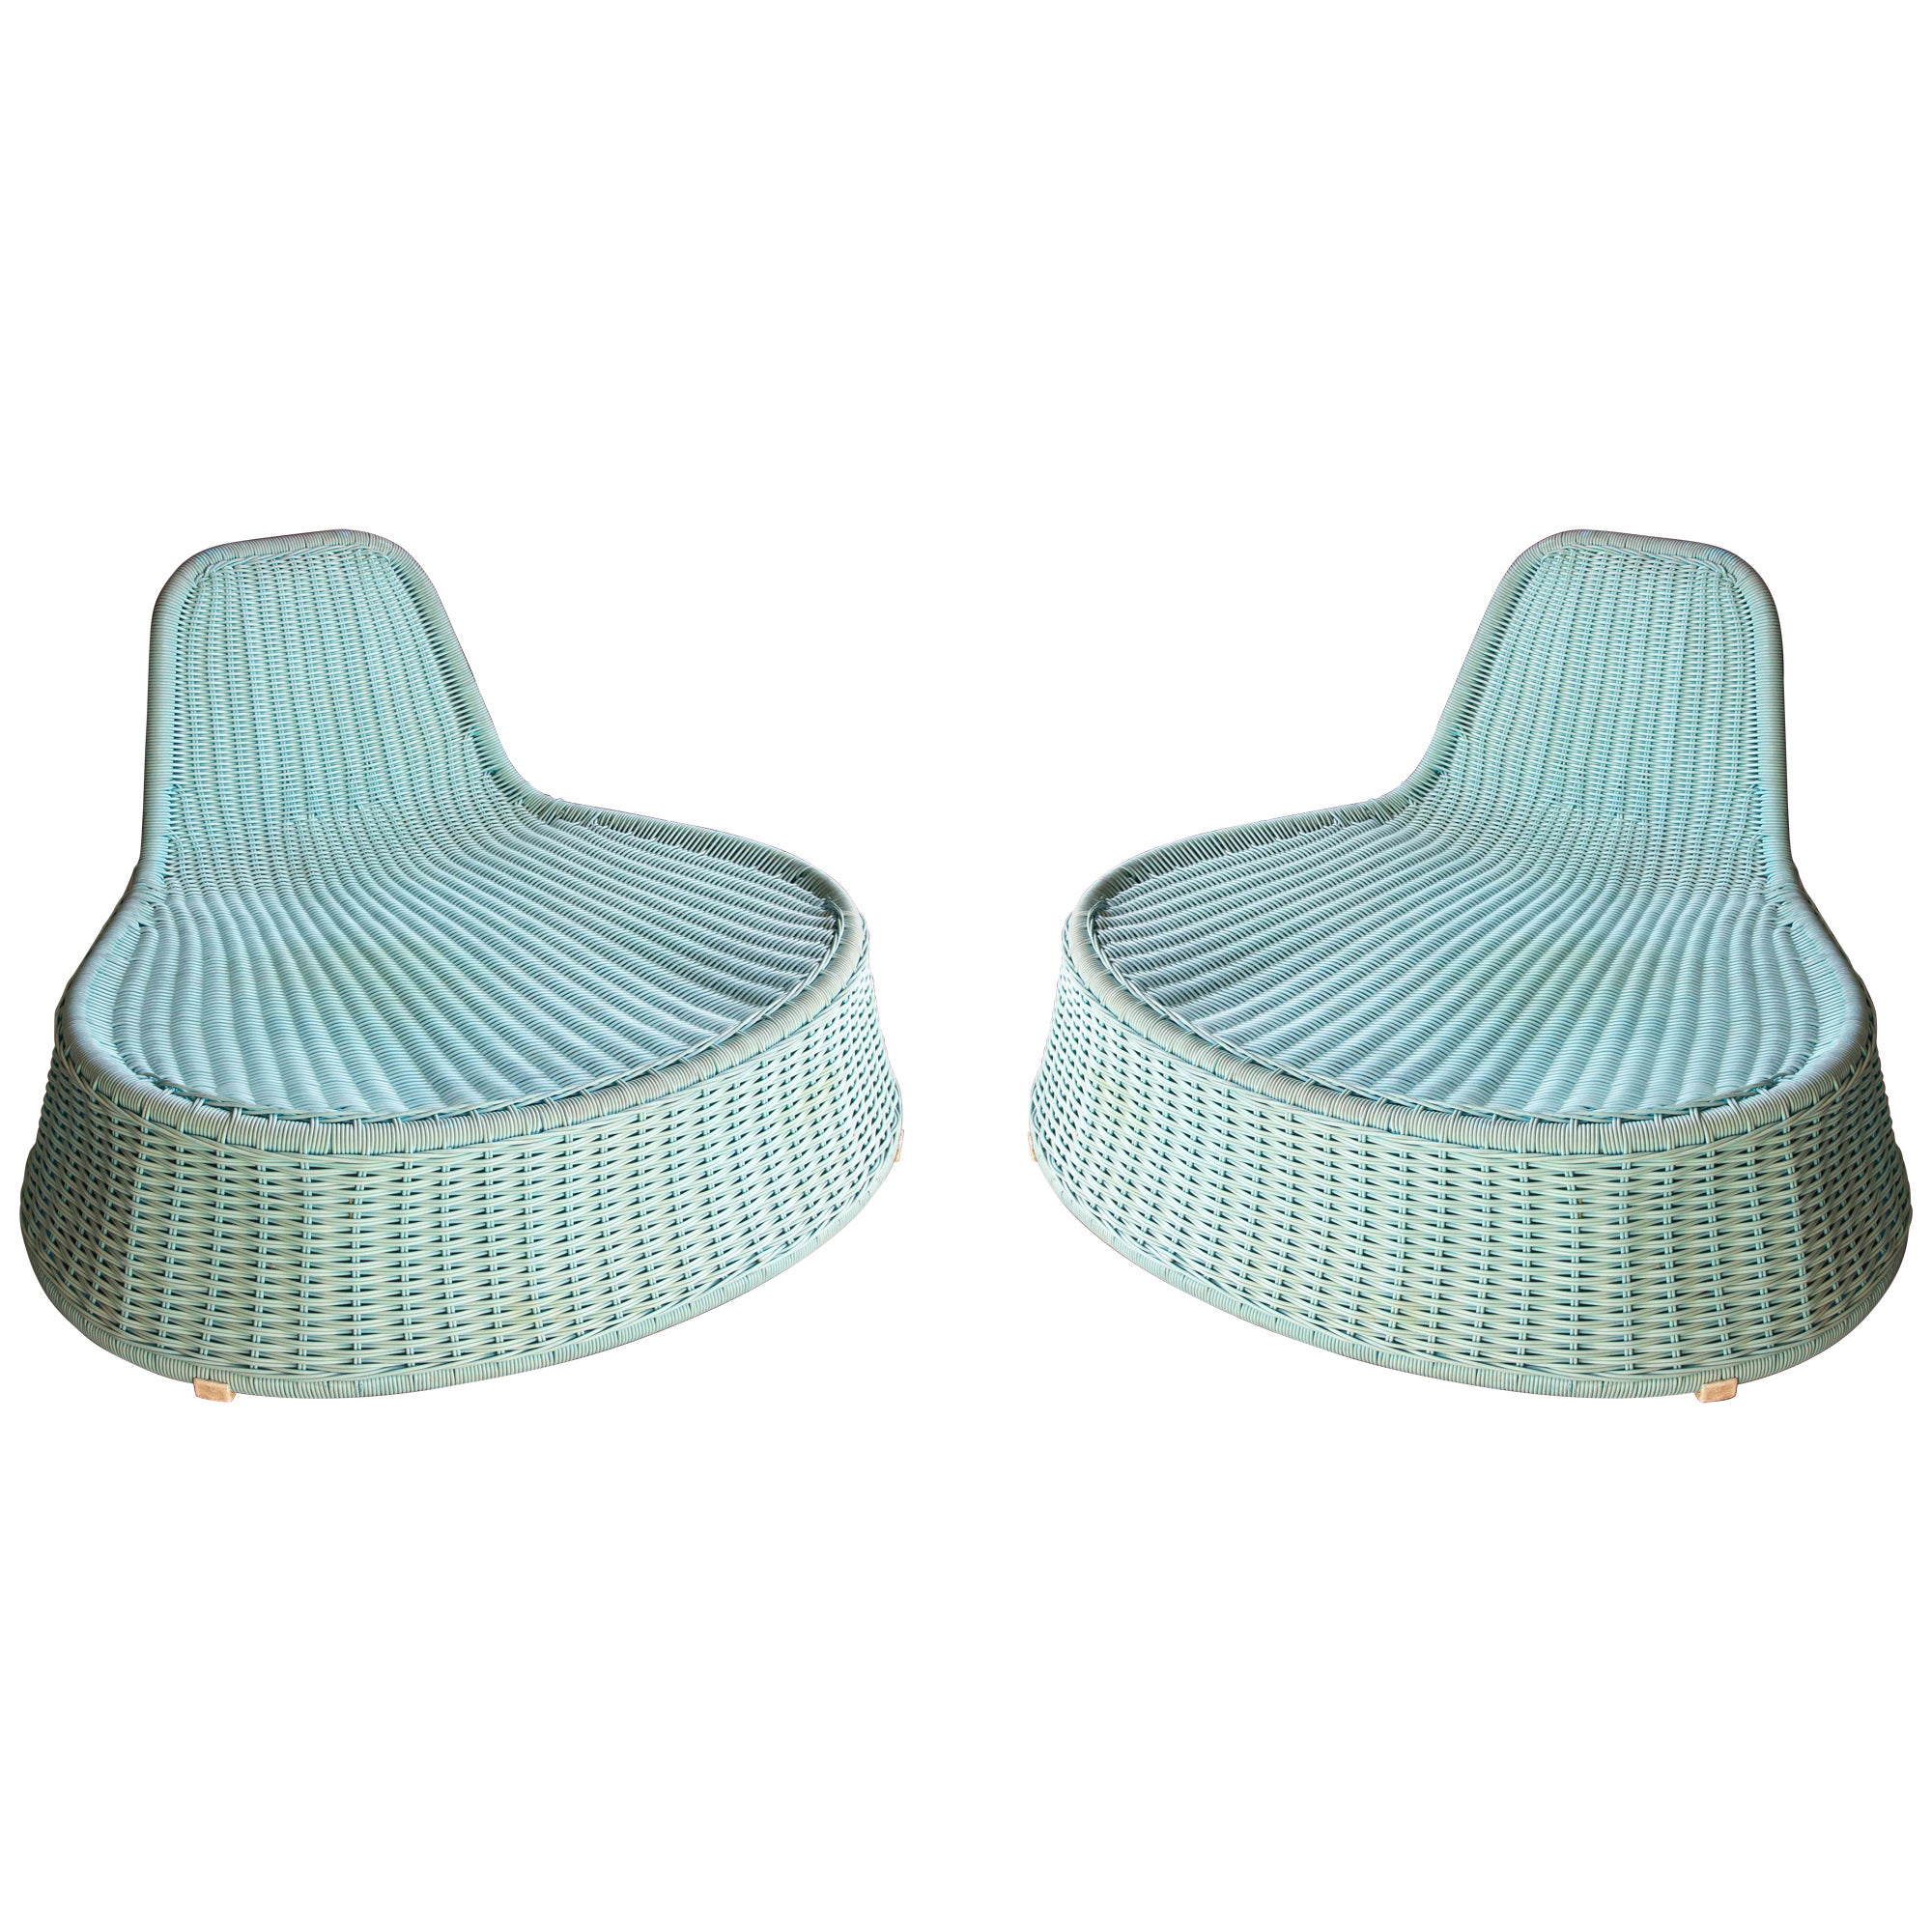 Pair of Synthetic Garden Chairs in Light Blue Colour